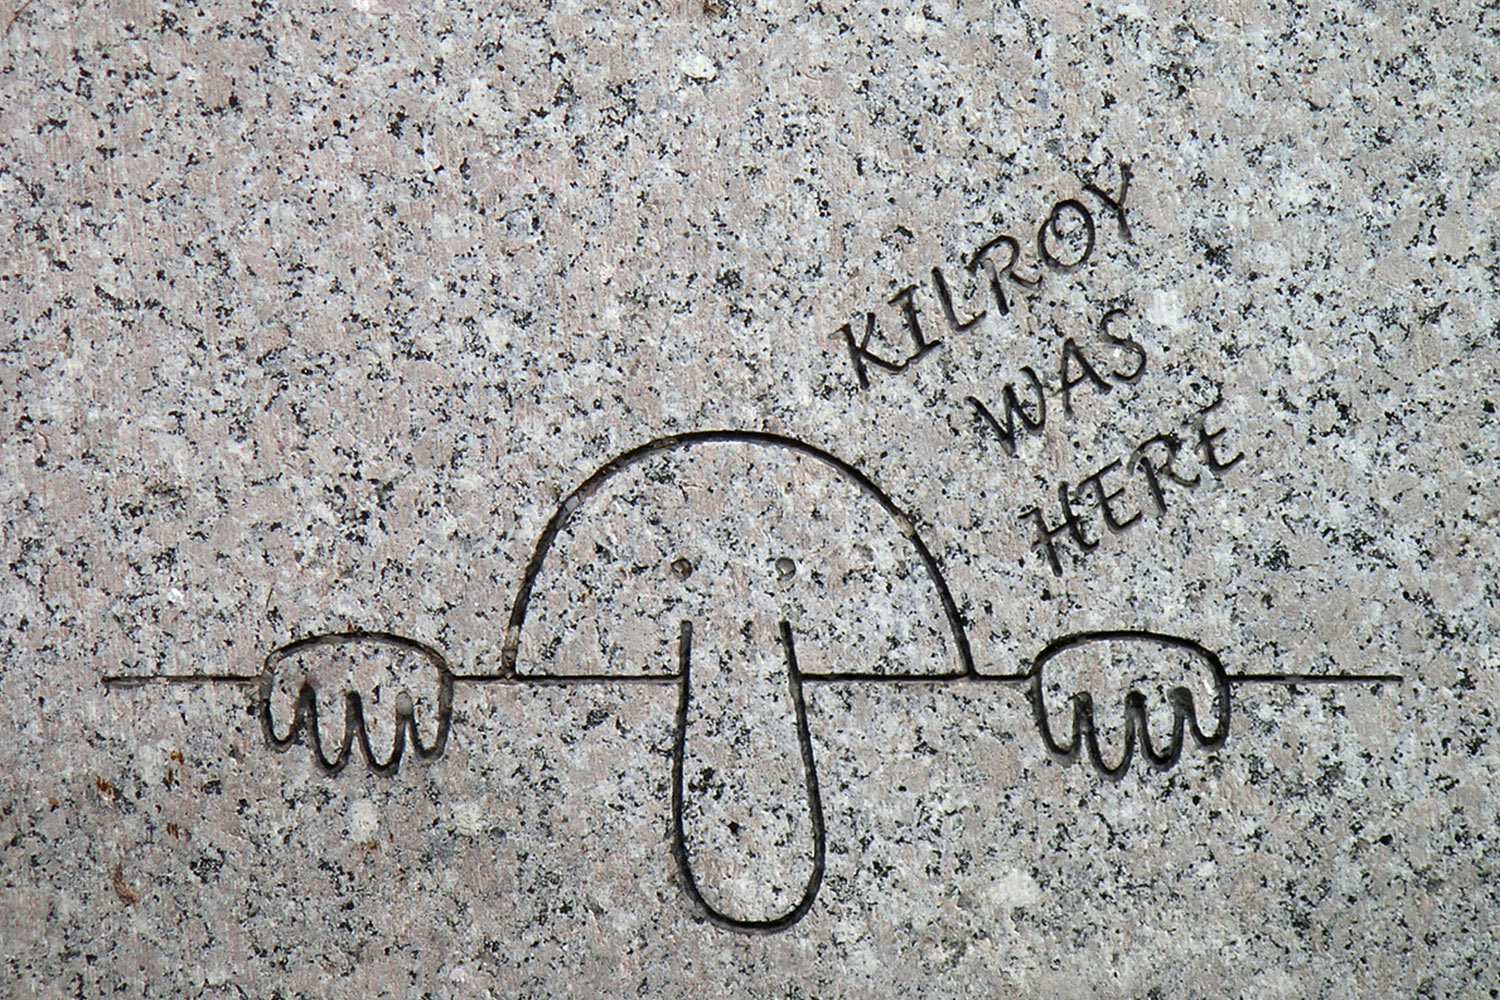 Cartoon character with long nose peering over wall with text saying 'kilroy was here'